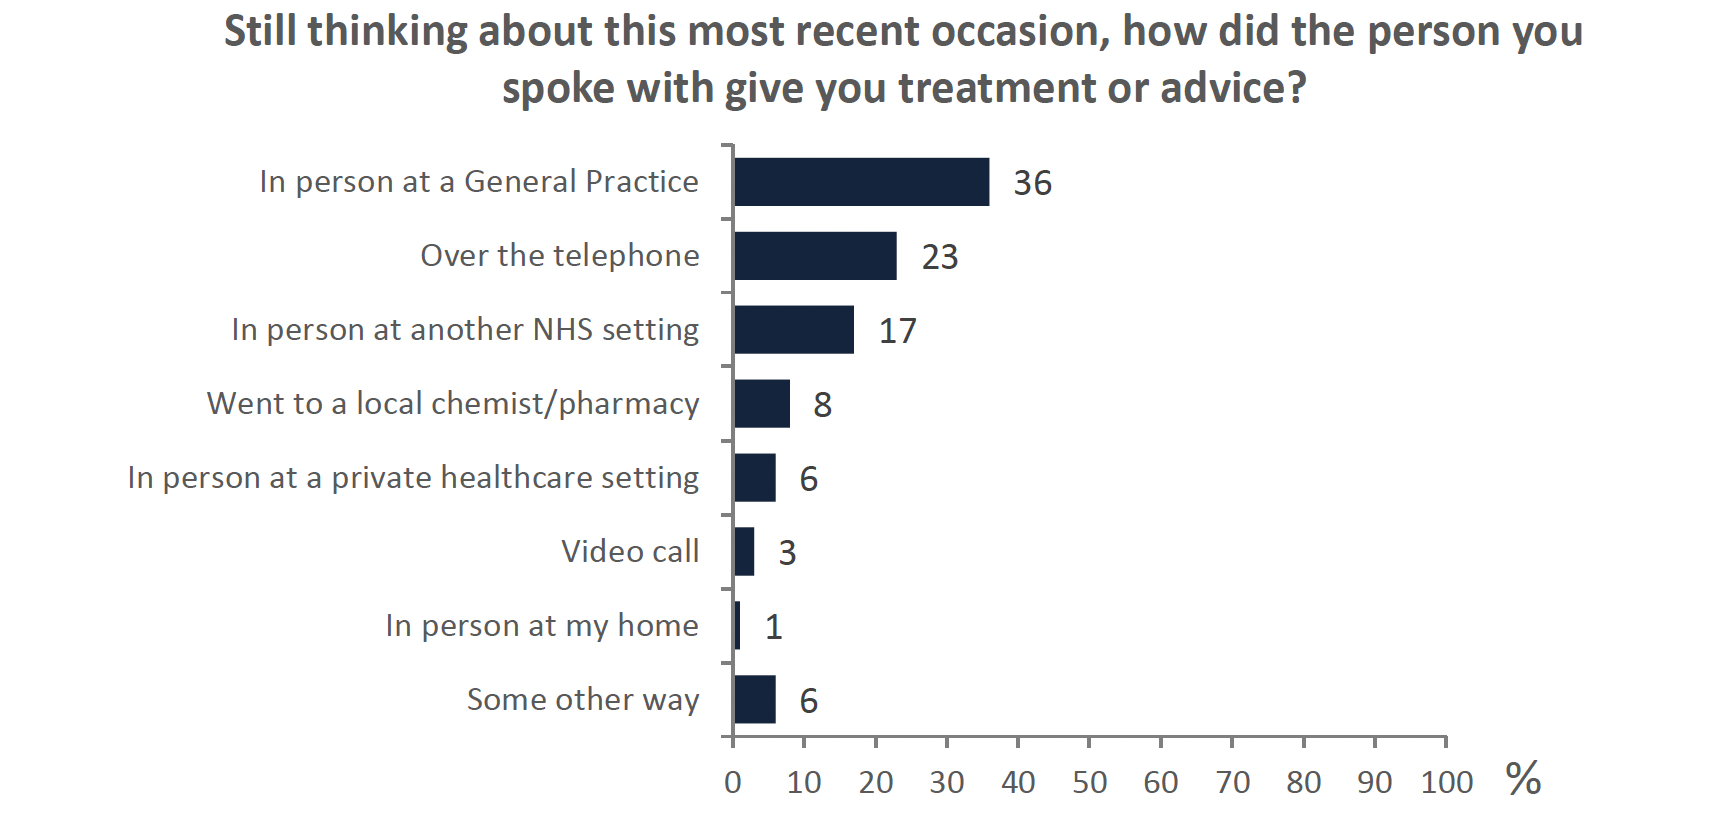 Horizontal graph showing modes of consultation
This horizontal graph shows how participants communicated with their health care provider when asking for advice or treatment. Of the respondents who contacted any health provider in the last 12 months, 36% said they spoke to someone in person at a general practice, 23% said over the telephone, and 17% said in person at another NHS setting. For all other responses, went to a local chemist/pharmacy, in person at a private healthcare setting, video call, in person at my own home, and some other way, less than 10% of respondents chose these.